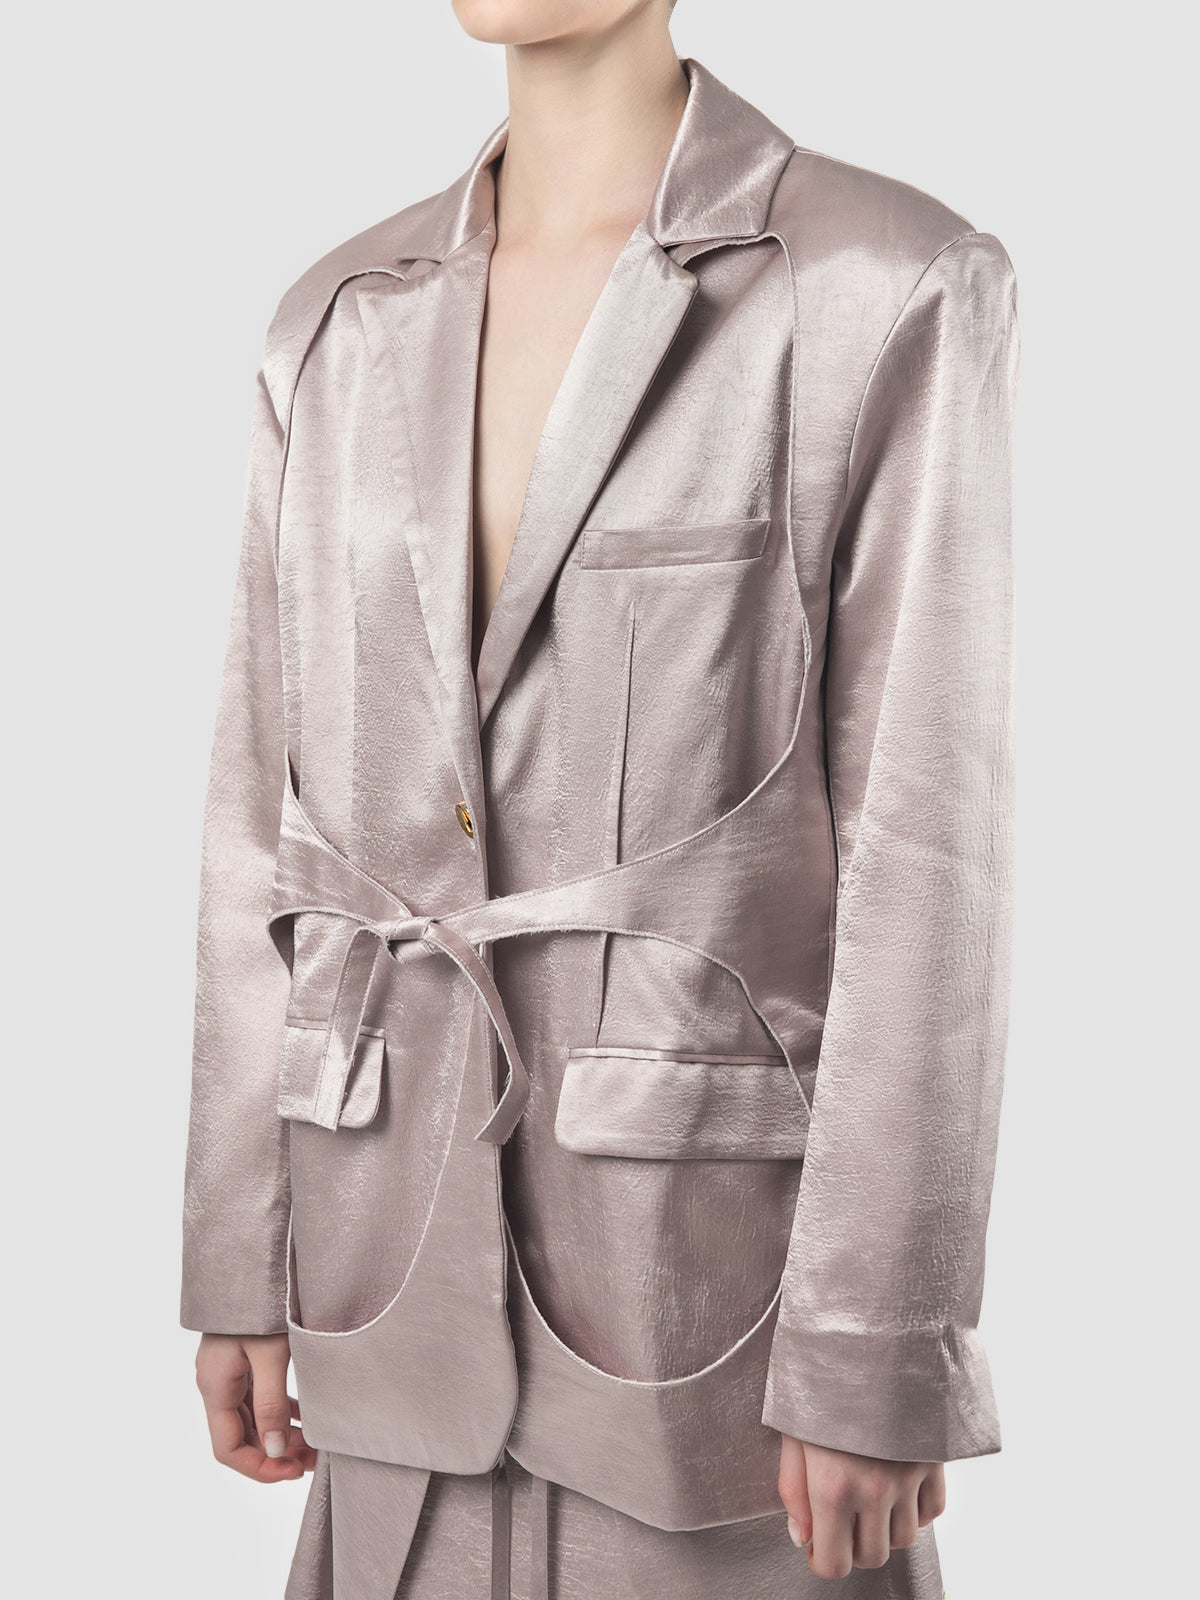 Lilac tailored suit with unfinished layered details